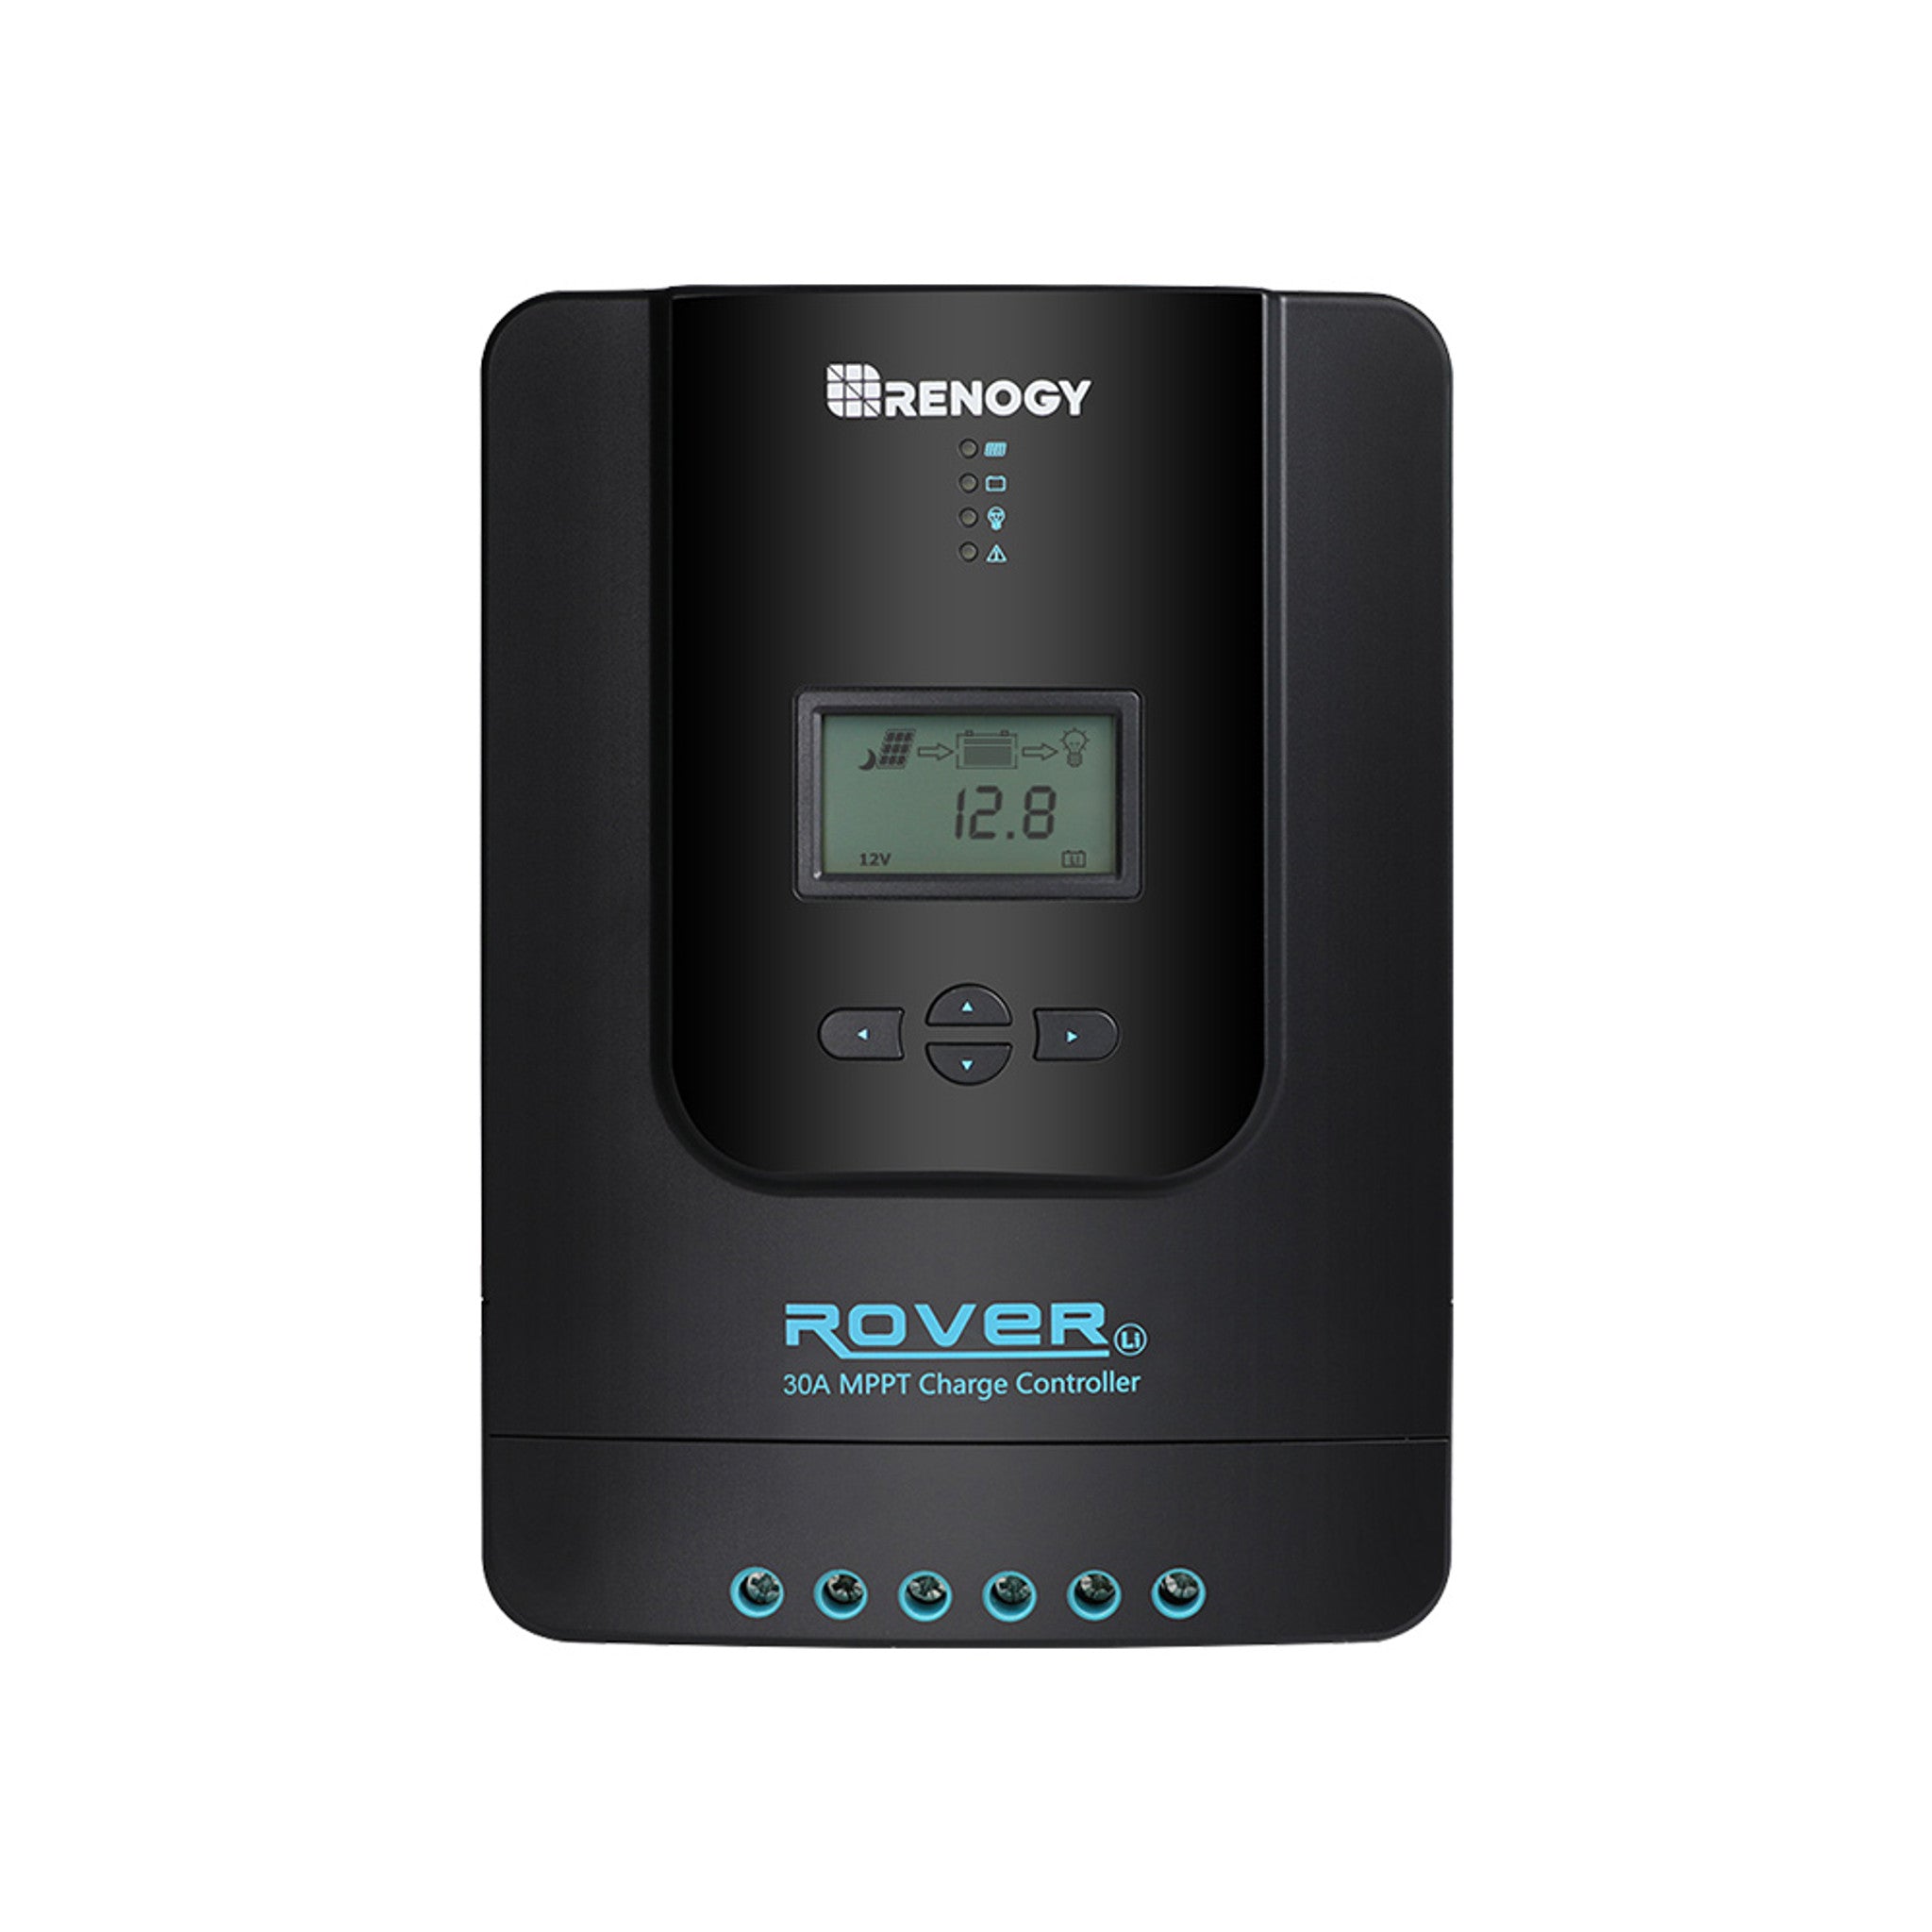 Renogy Rover Li 30 Amp MPPT Solar Charge Controller with Bluetooth Module